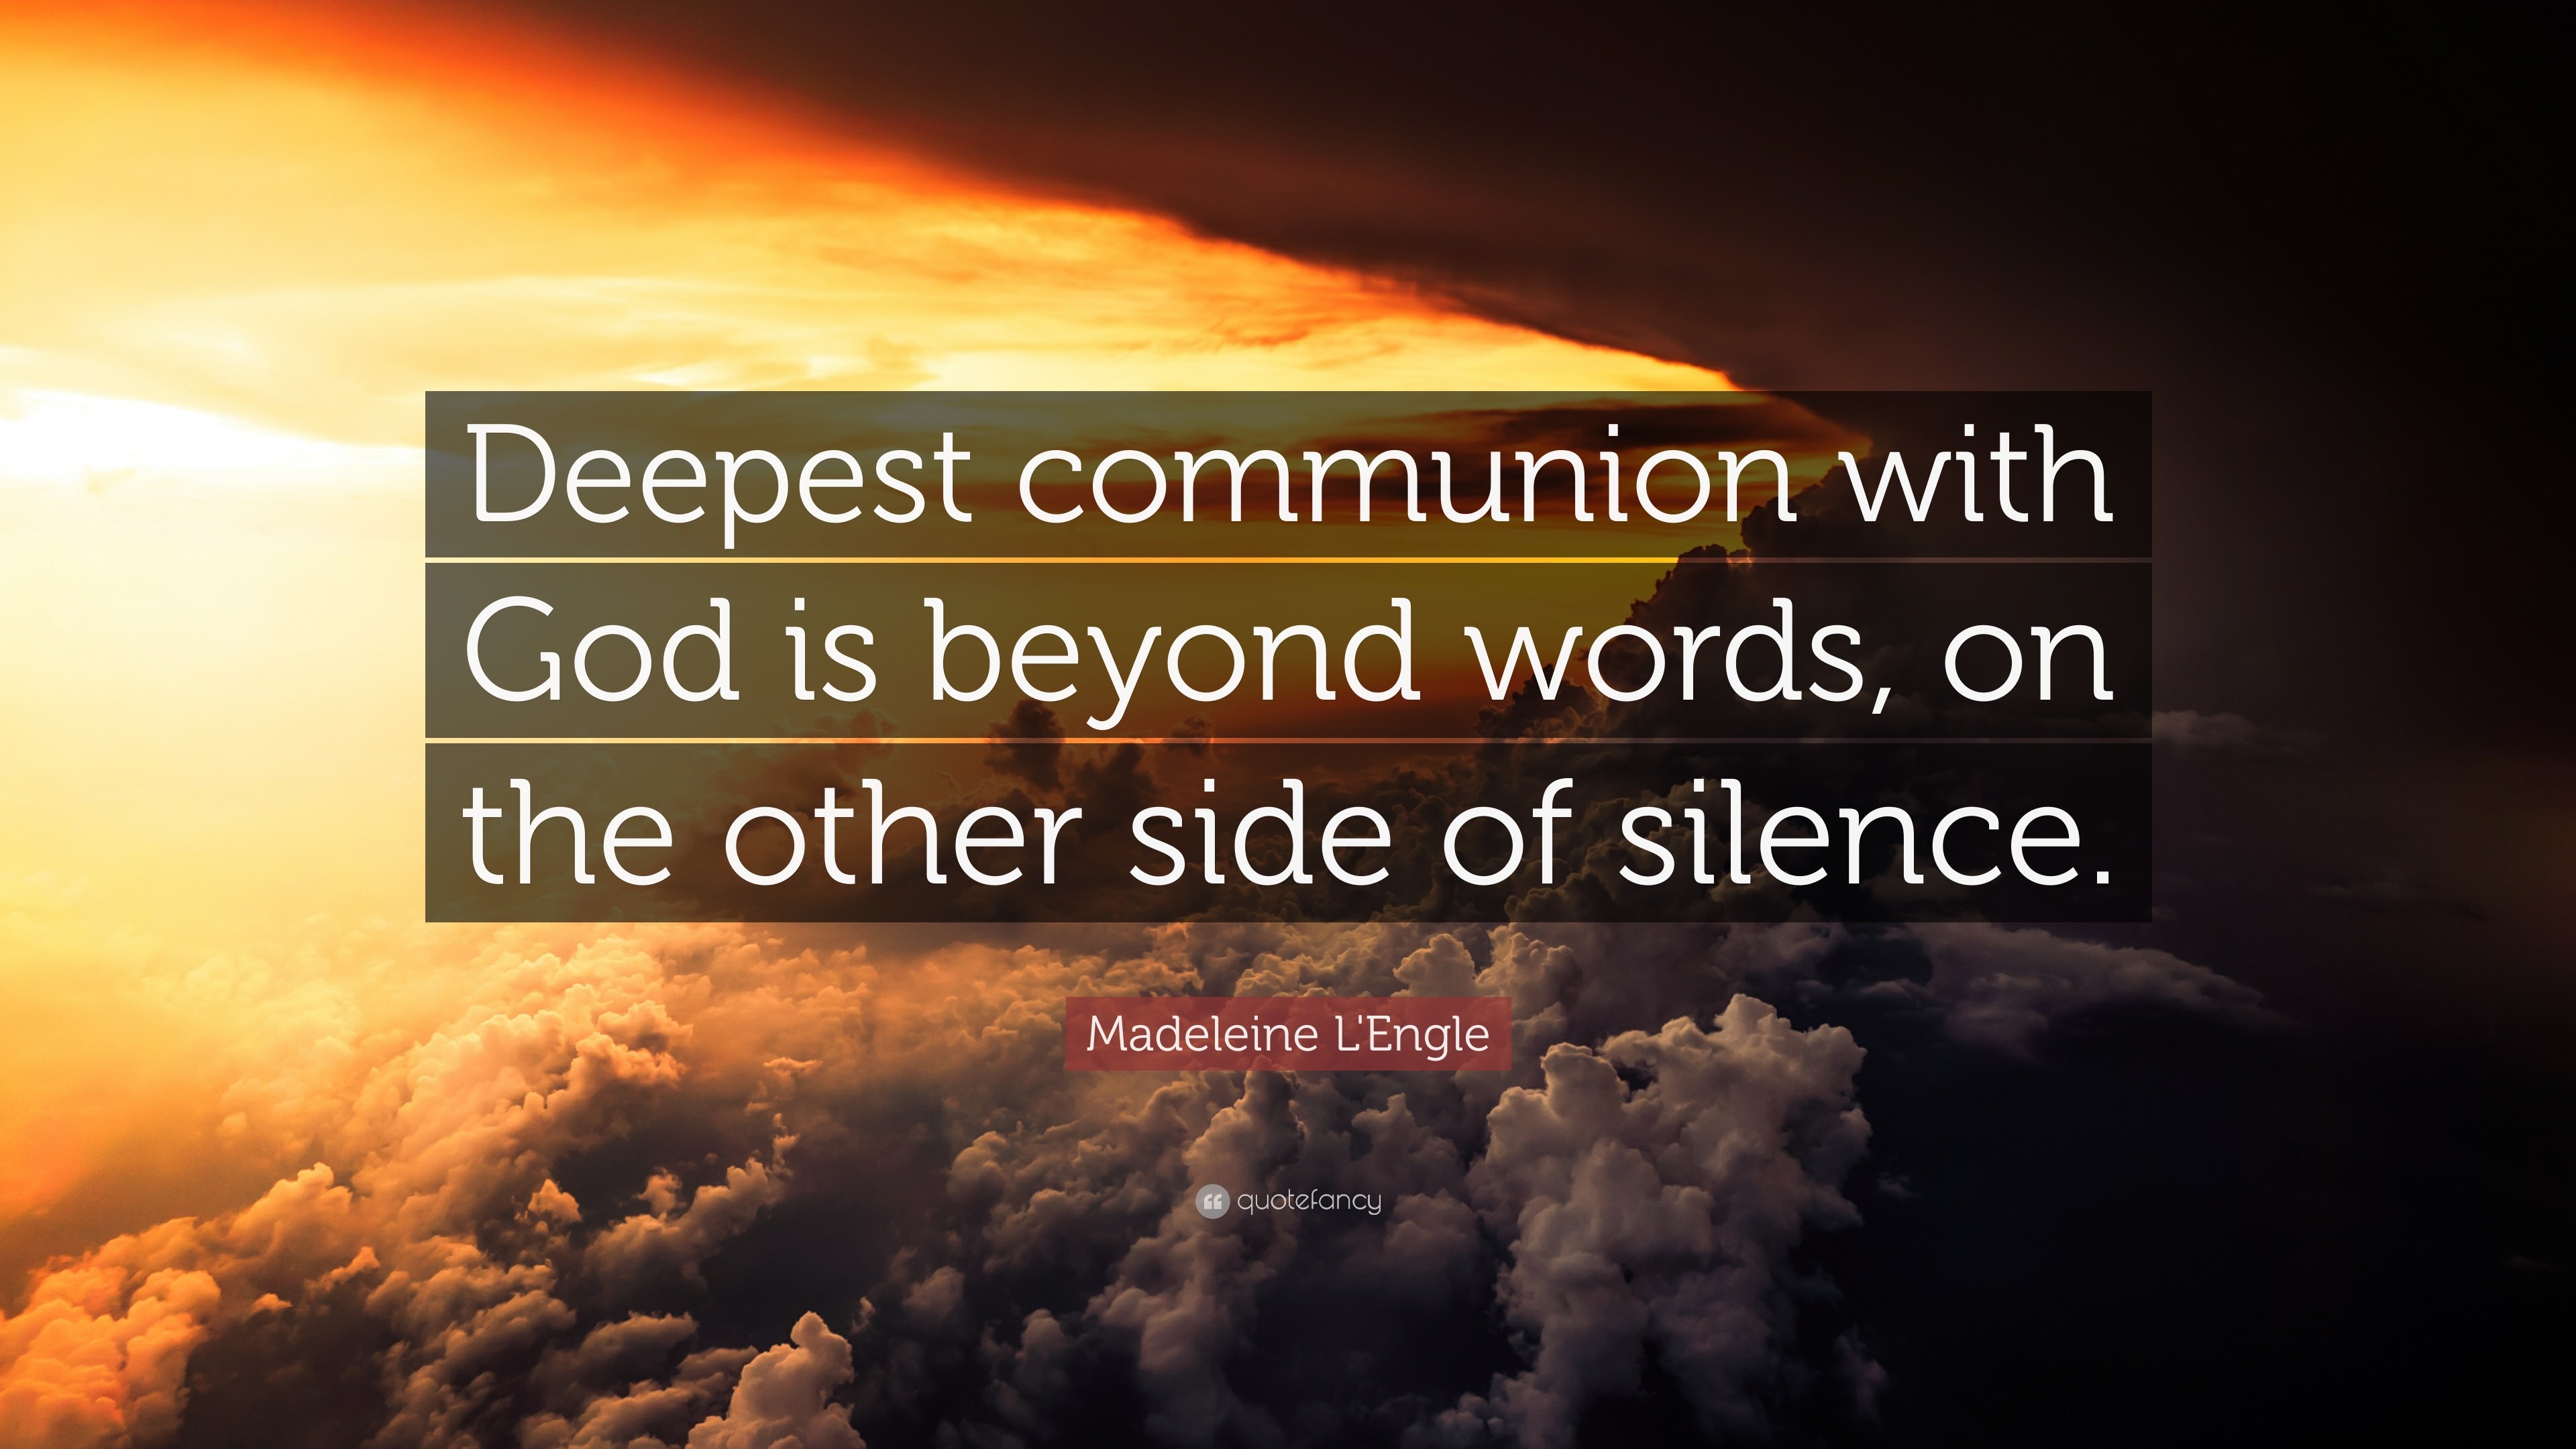 Deepest communion with God is beyond words, on the other side of silence. 